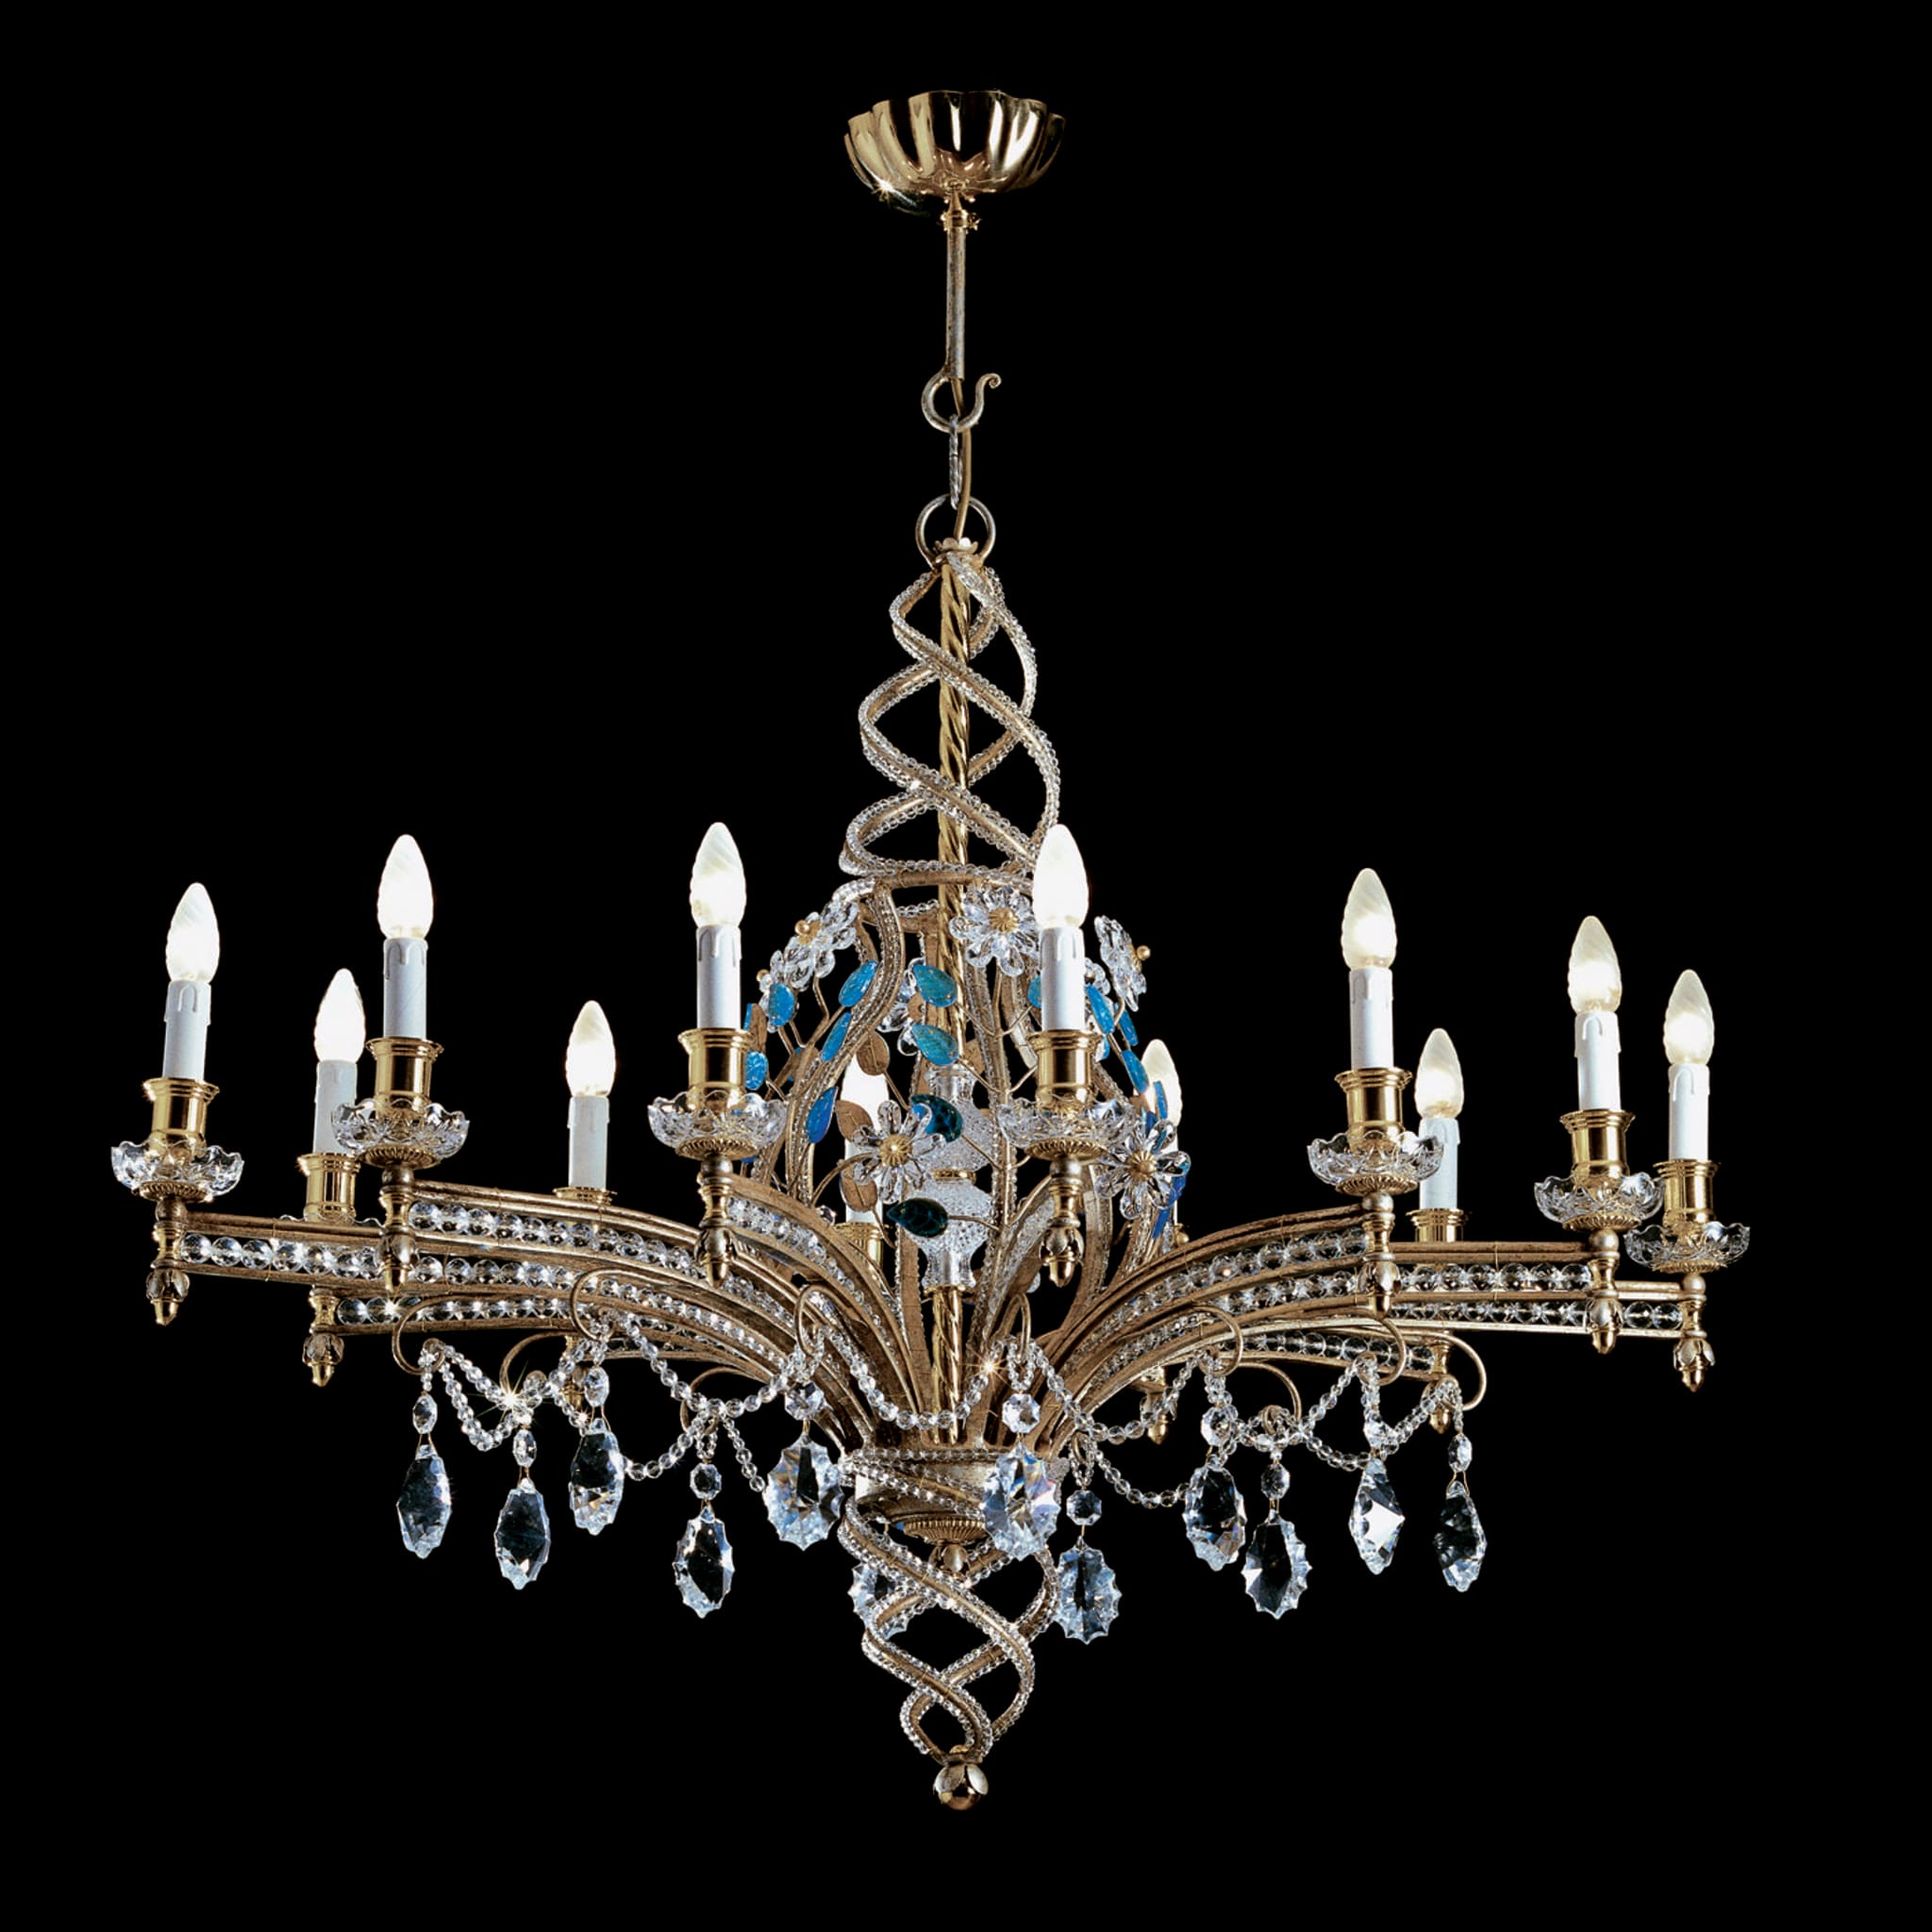 12-Light Iron Chandelier with Straight Arms - Alternative view 1